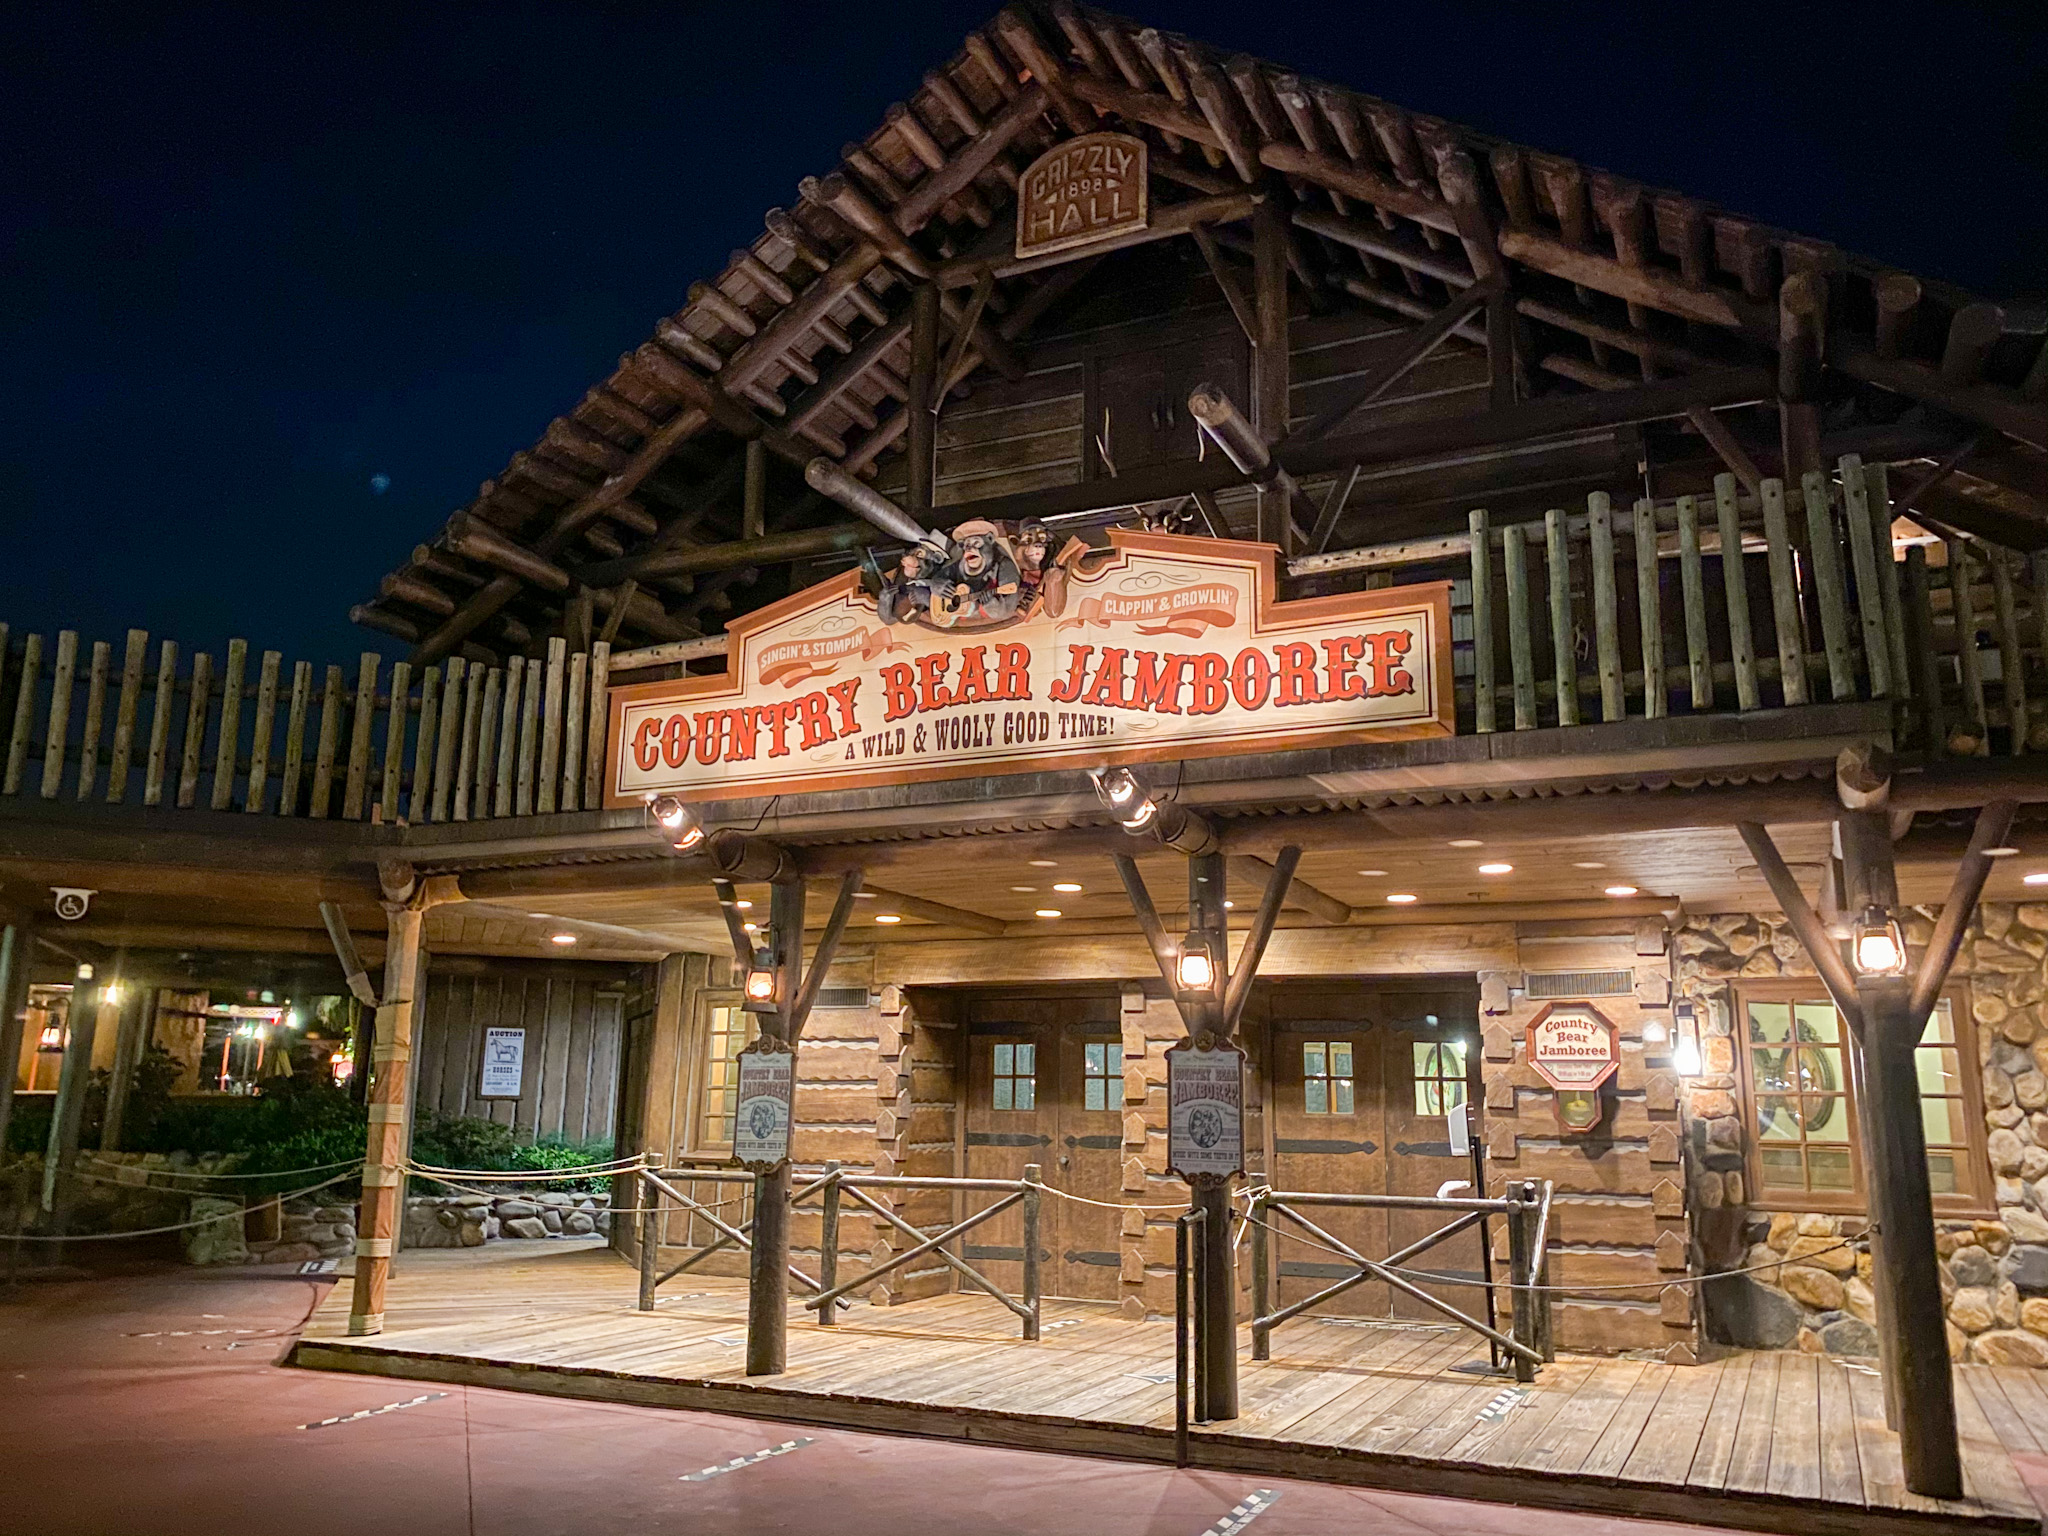 Exterior of the Countree Bear Jamboree. THe sign is done in a Old Western style and the building looks like a log cabin.